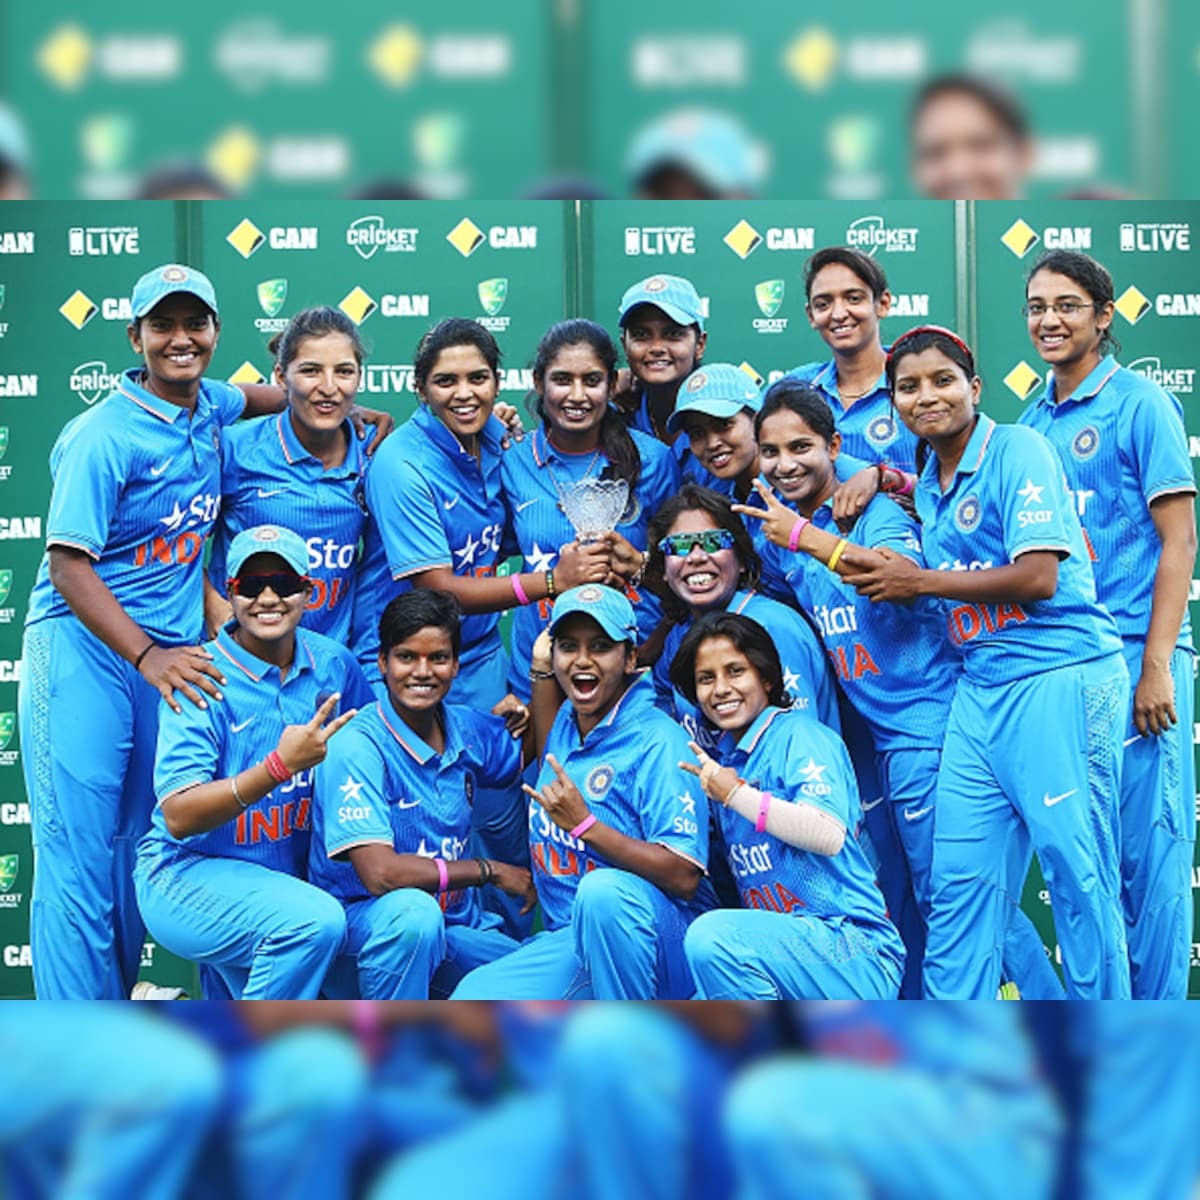 T20 league for women cricketers